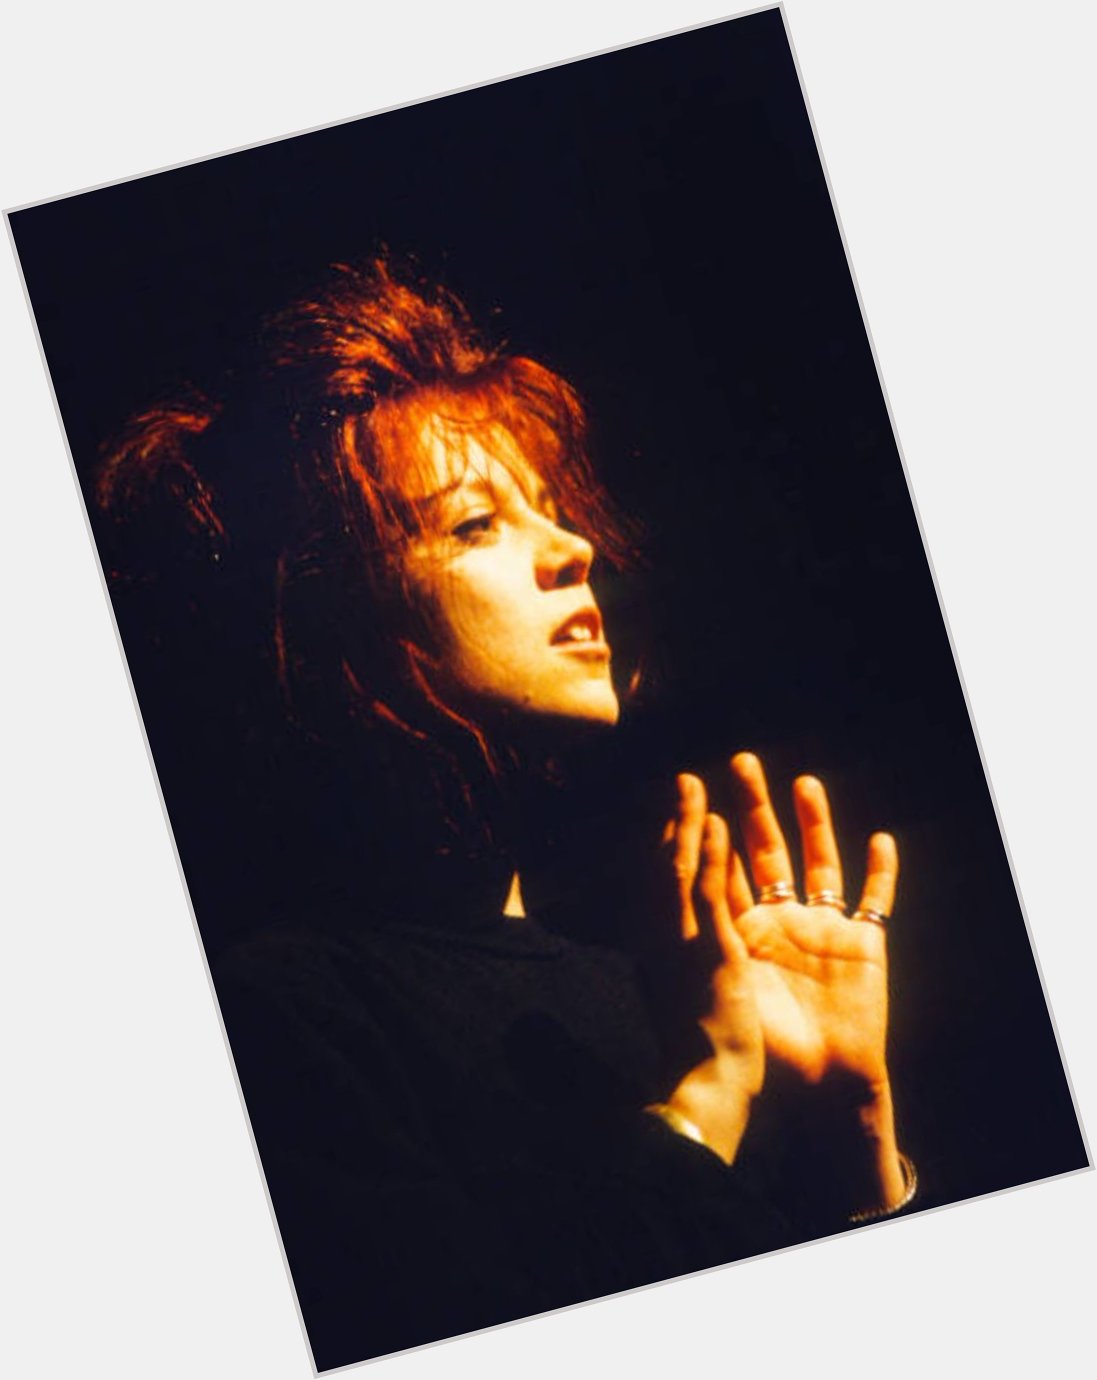 Happy Birthday to The Sundays vocalist and songwriter Harriet Wheeler, born on this day in Oxfordshire in 1963.    